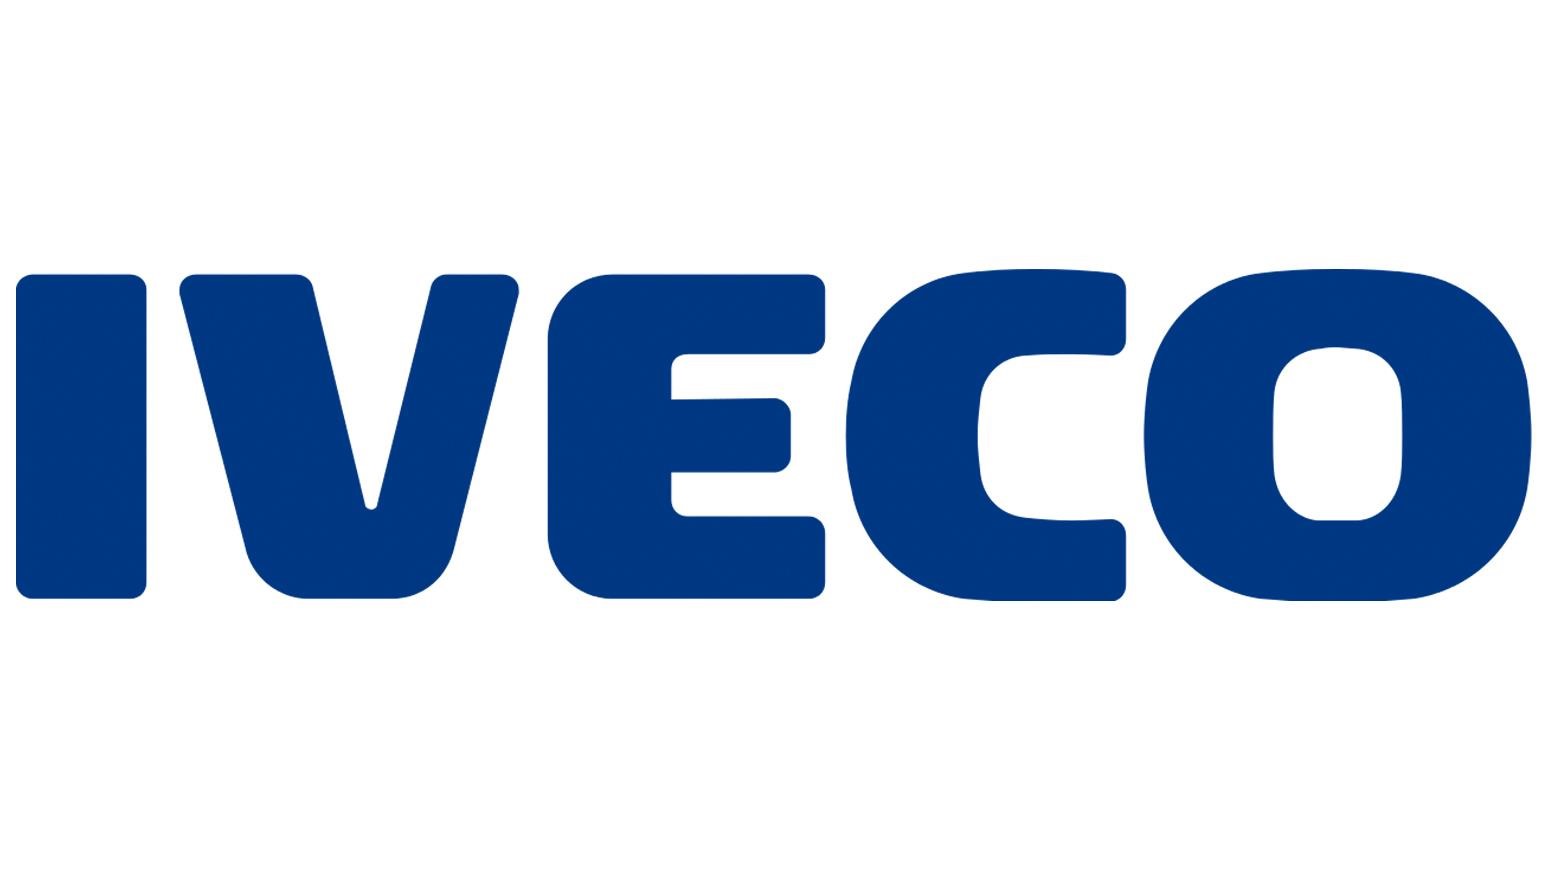 IVECO Launches Projects To Promote The Benefits Of Natural Gas & Its Key Role In Decarbonizing Transport